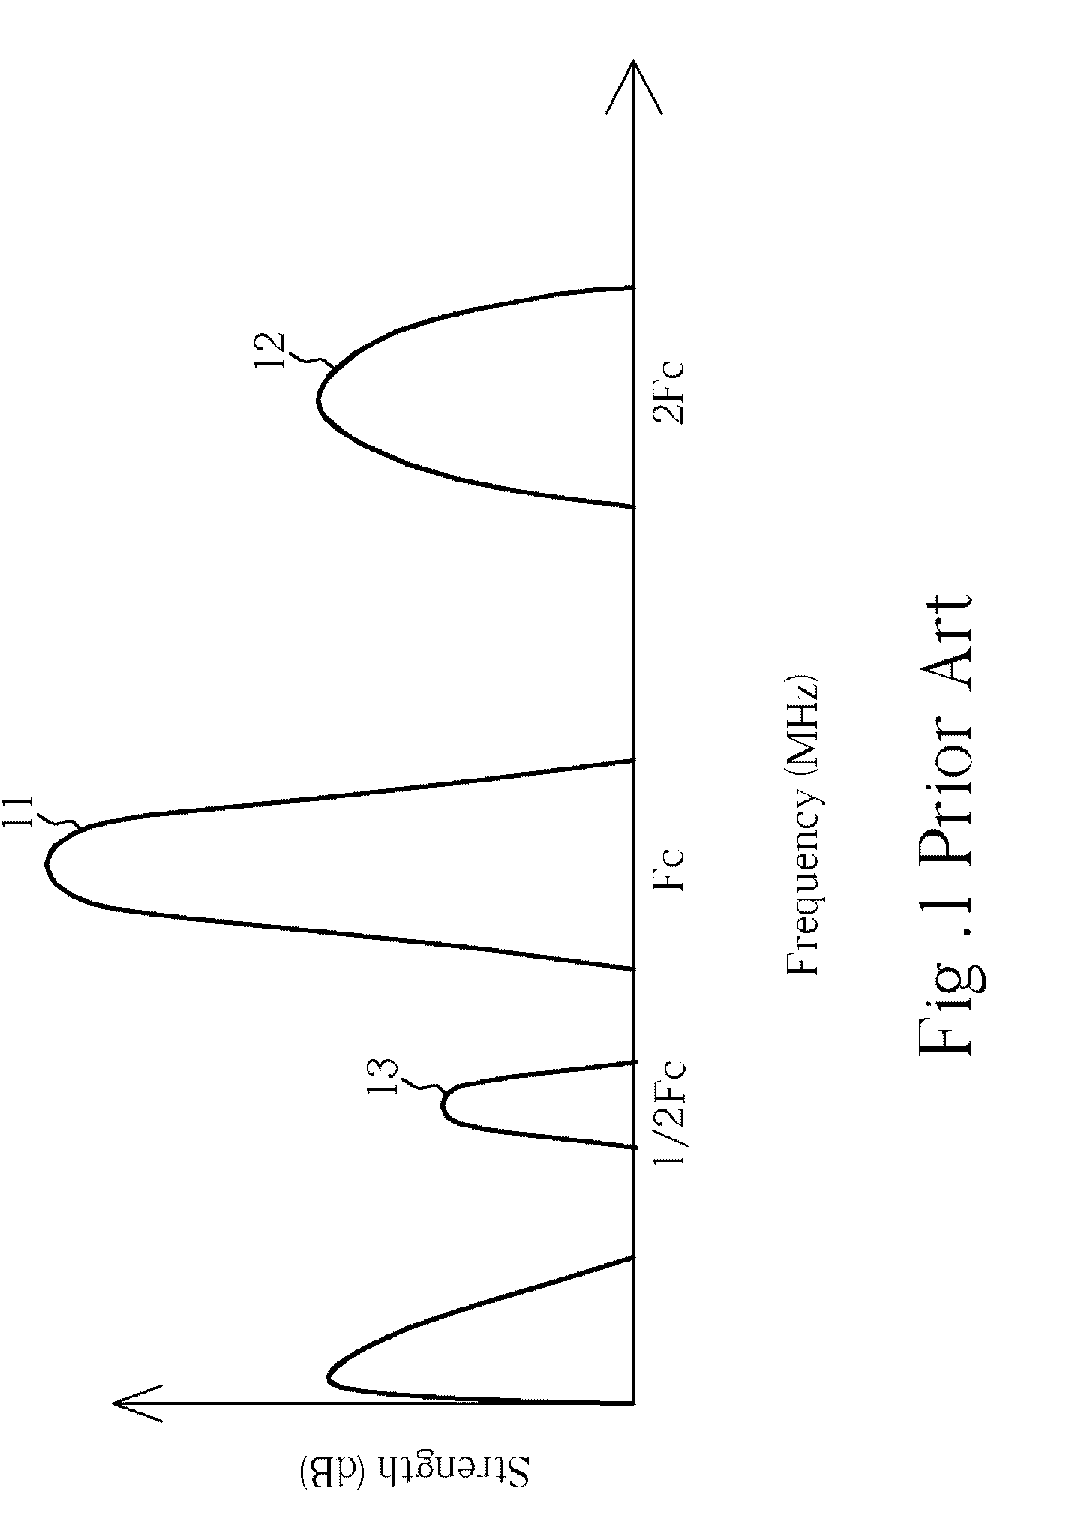 Method of intracranial ultrasound imaging and related system